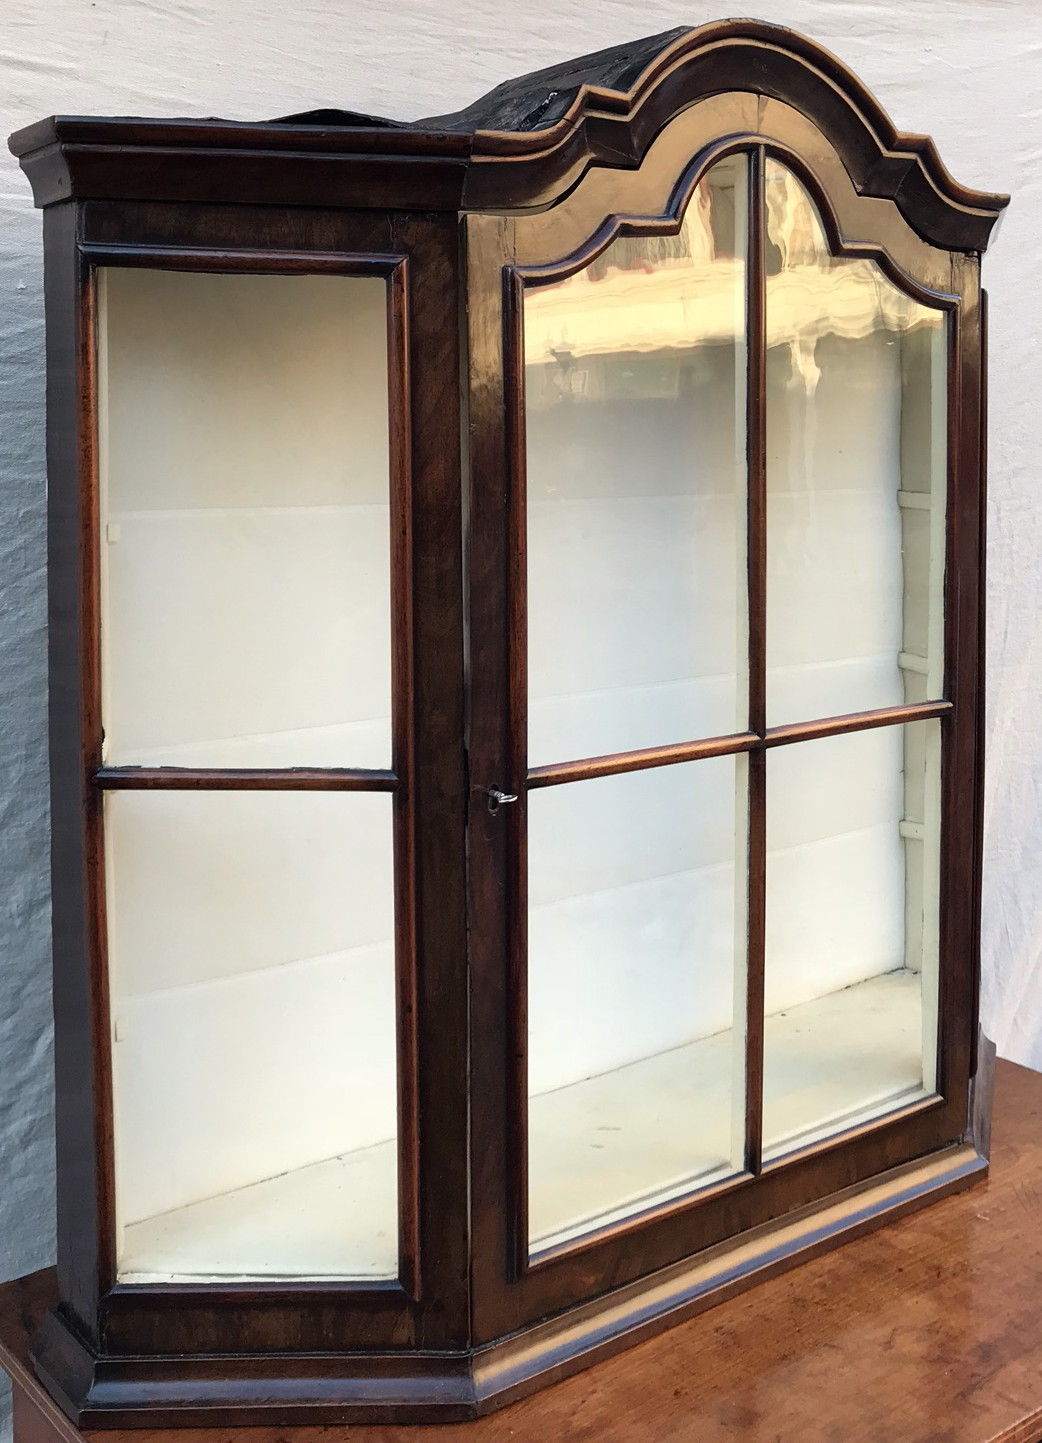 18TH CENTURY WILLIAM & MARY PERIOD WALL CABINET VITRINE W/TOMBSTONE BONNET